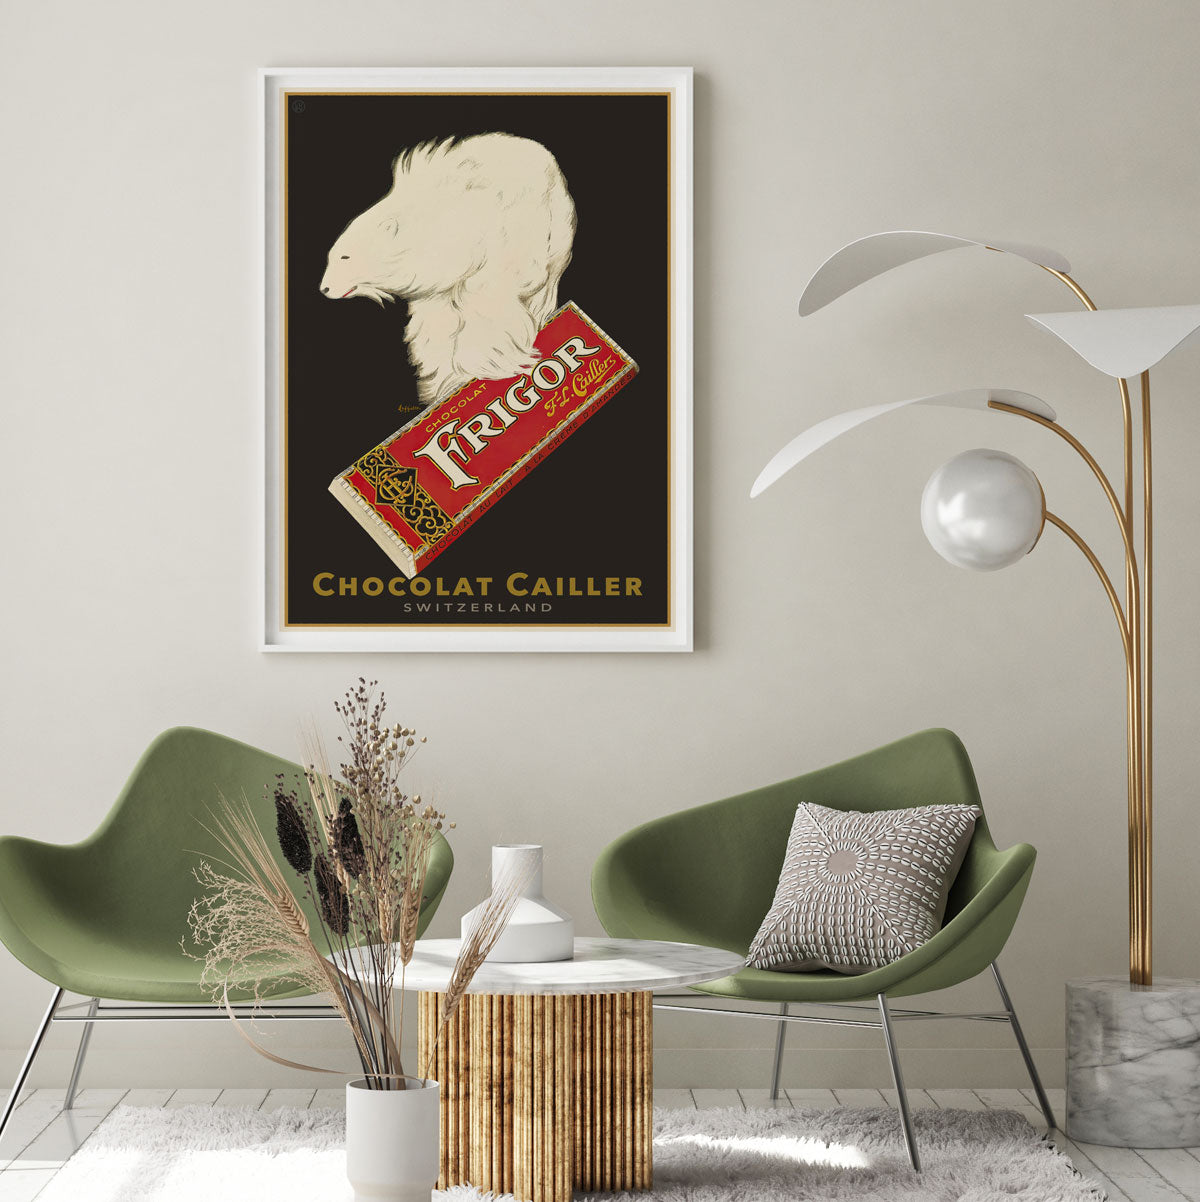 Chocolat Cailler vintage retro advertising poster from Places We Luv